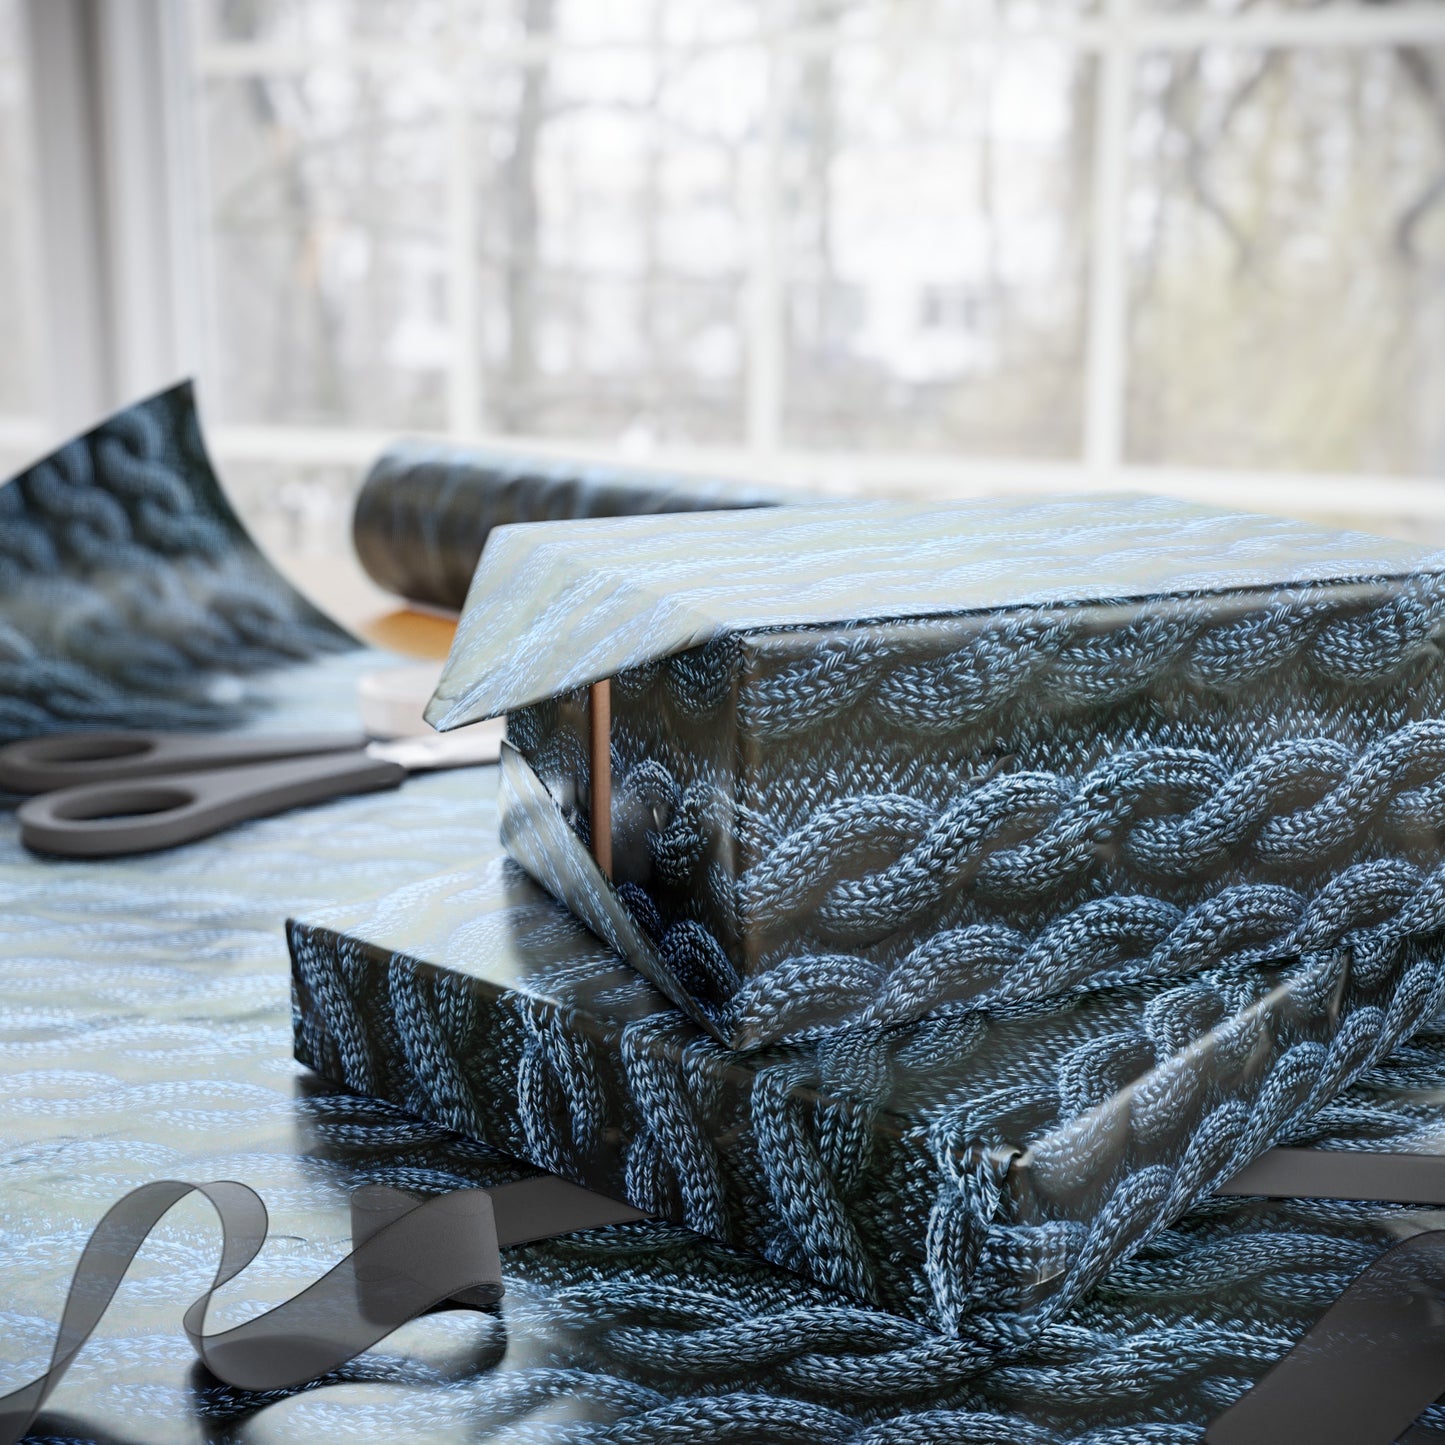 Faux Cable Knit Illusion Wrapping Paper Rolls